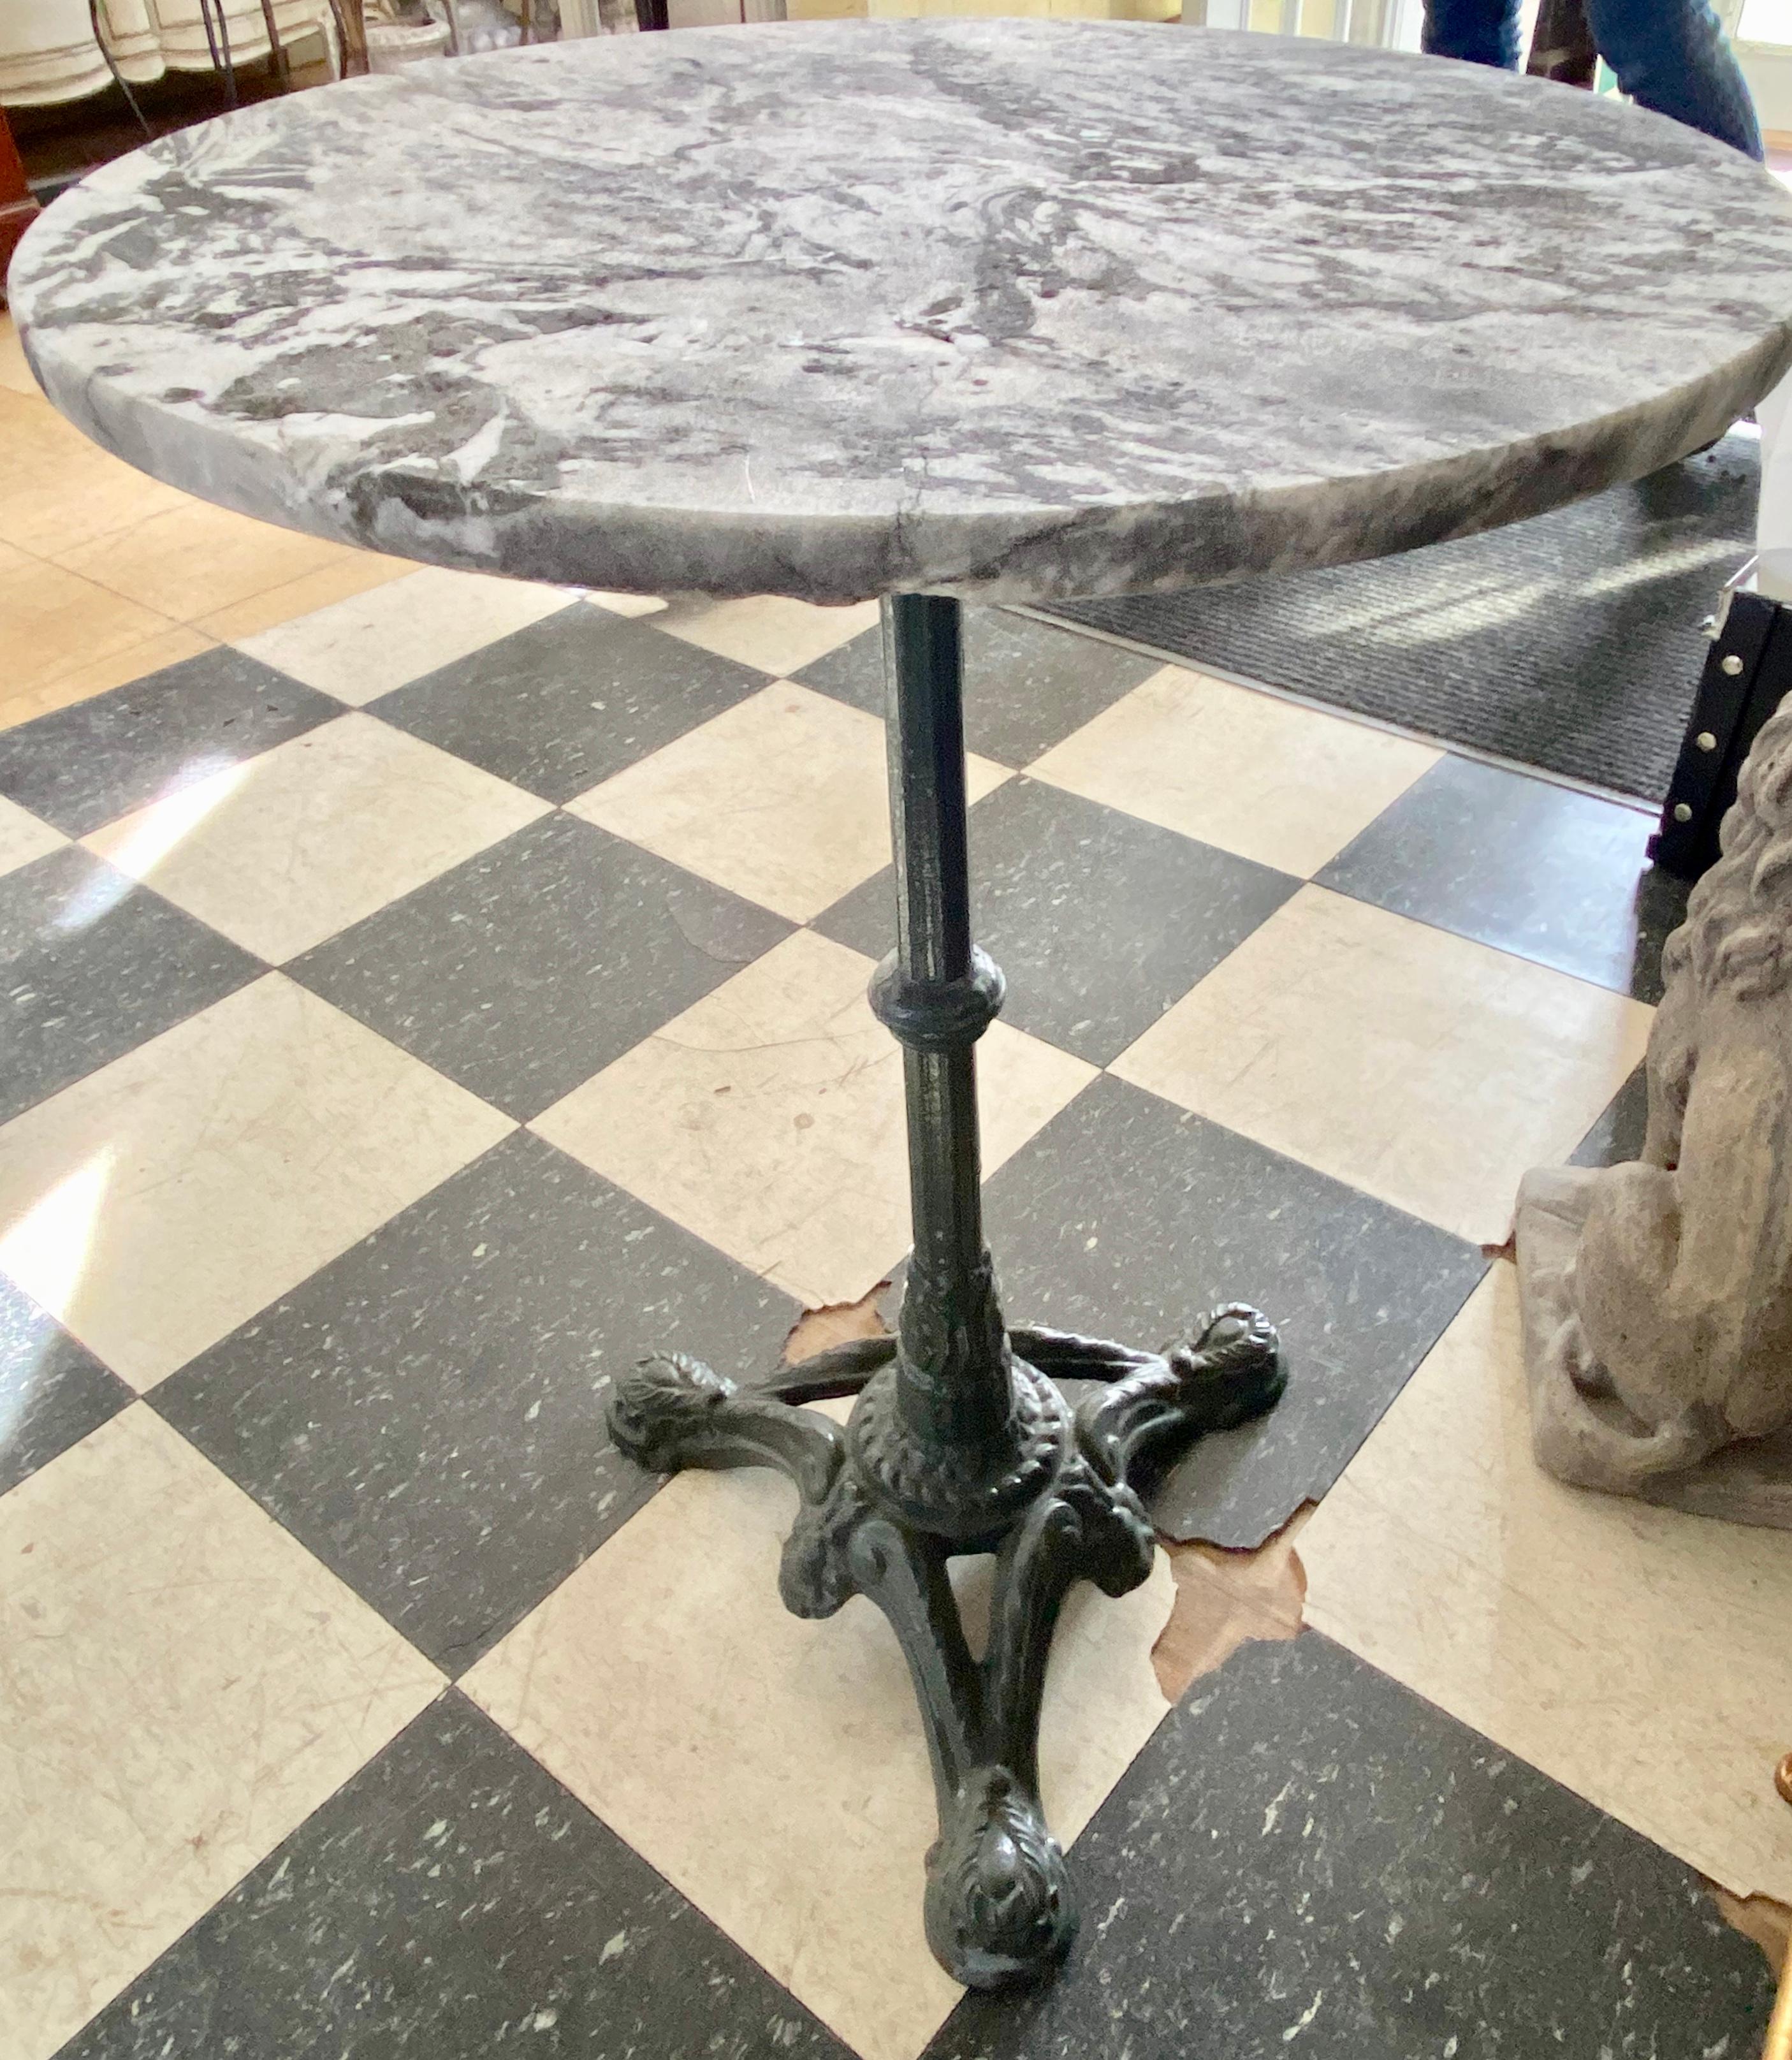 A fine vintage French café or bistro table with a round or circular marble top. painted cast iron pedestal base. Great for an indoor or outdoor patio or garden.
Dimensions: H 27.78